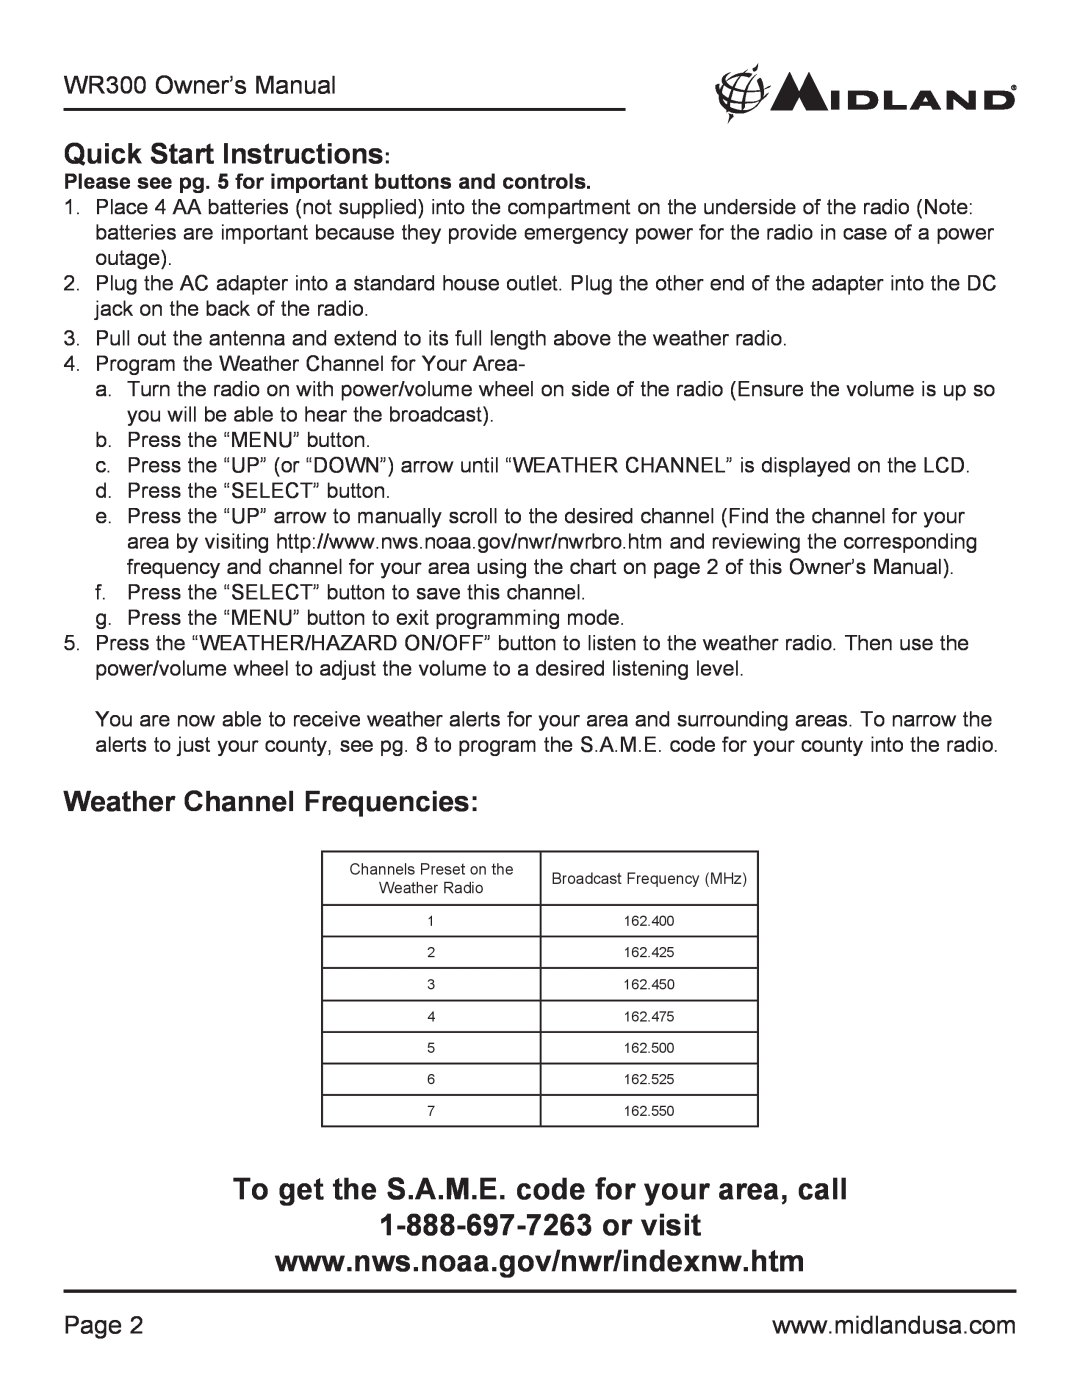 Midland Radio WR300 owner manual Quick Start Instructions, Weather Channel Frequencies, Page 